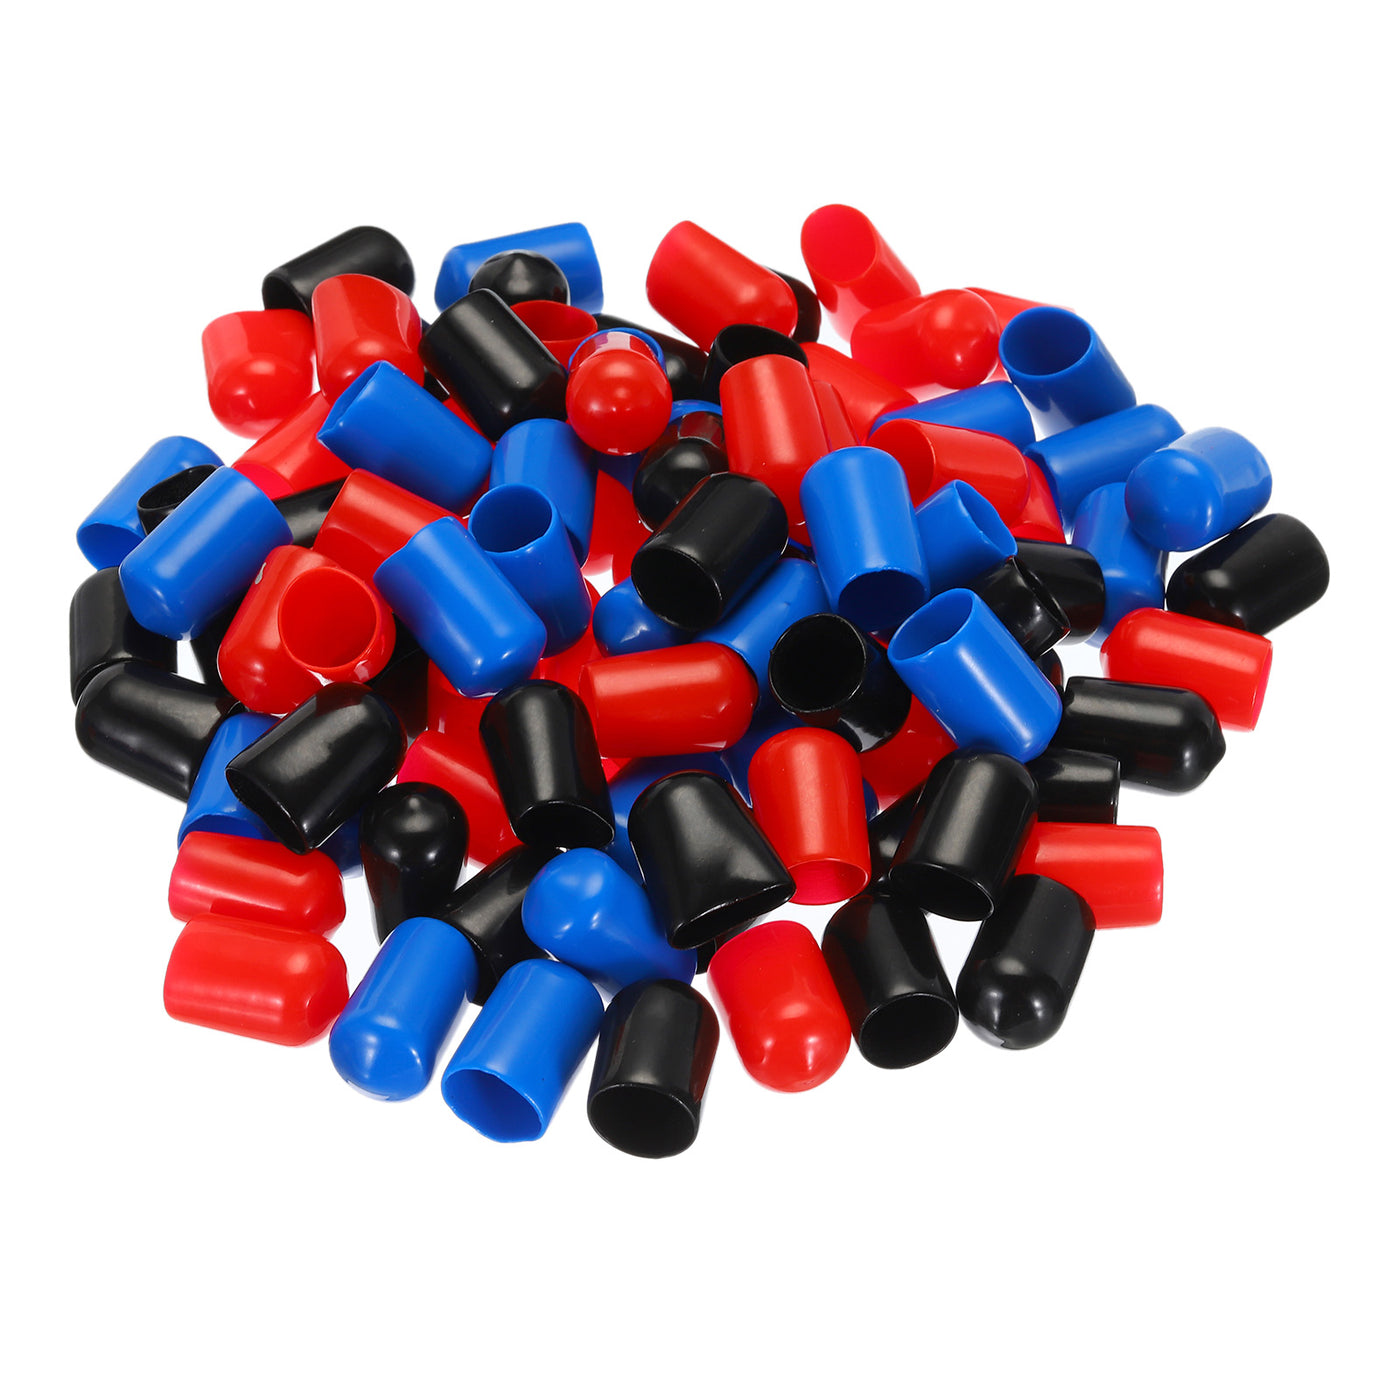 uxcell Uxcell 90pcs Rubber End Caps 14mm ID Vinyl PVC Round Tube Bolt Cap Cover Screw Thread Protectors, Black Red Blue